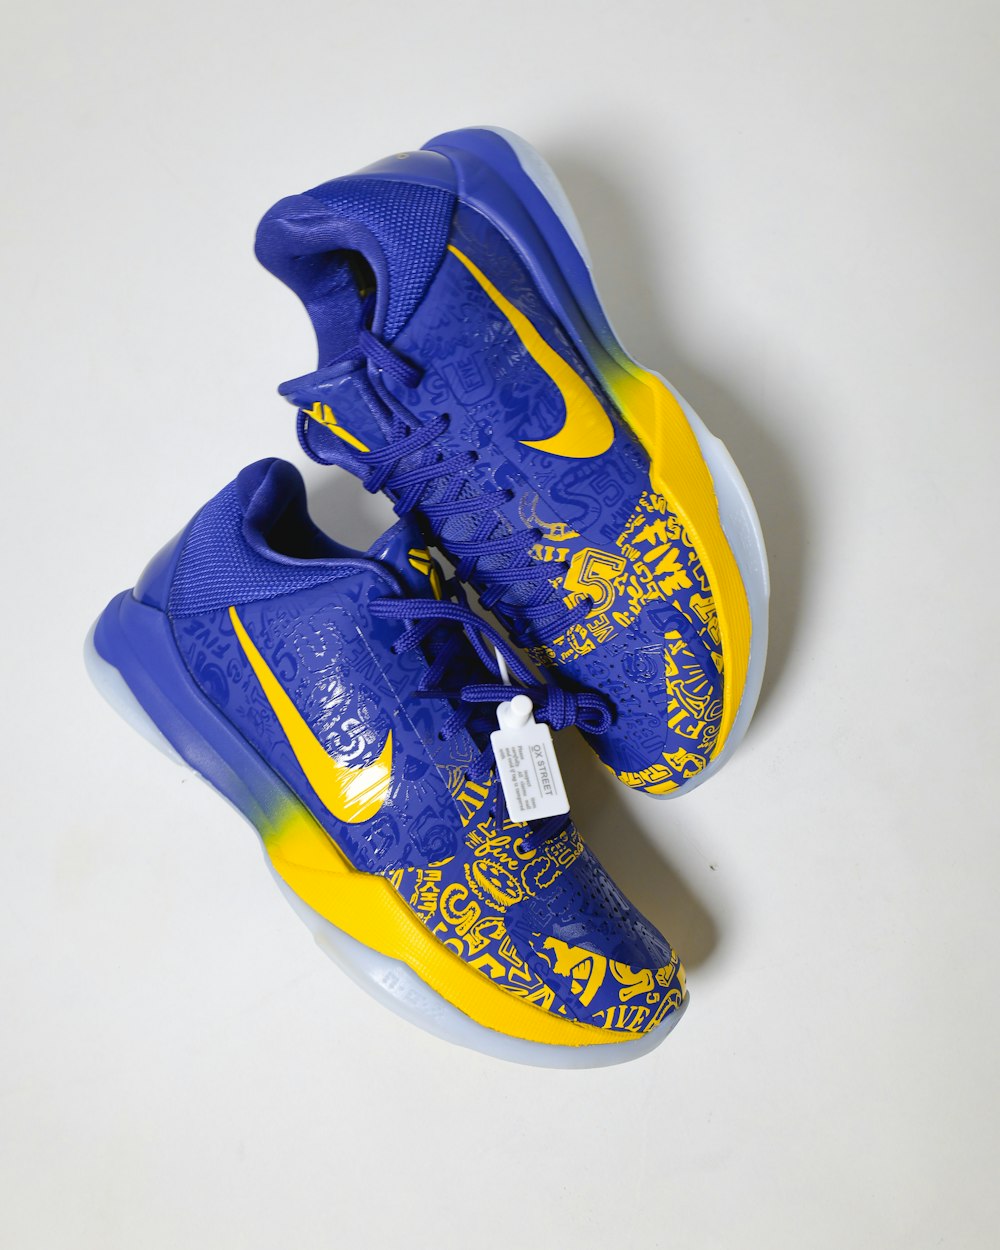 blue and yellow nike athletic shoes